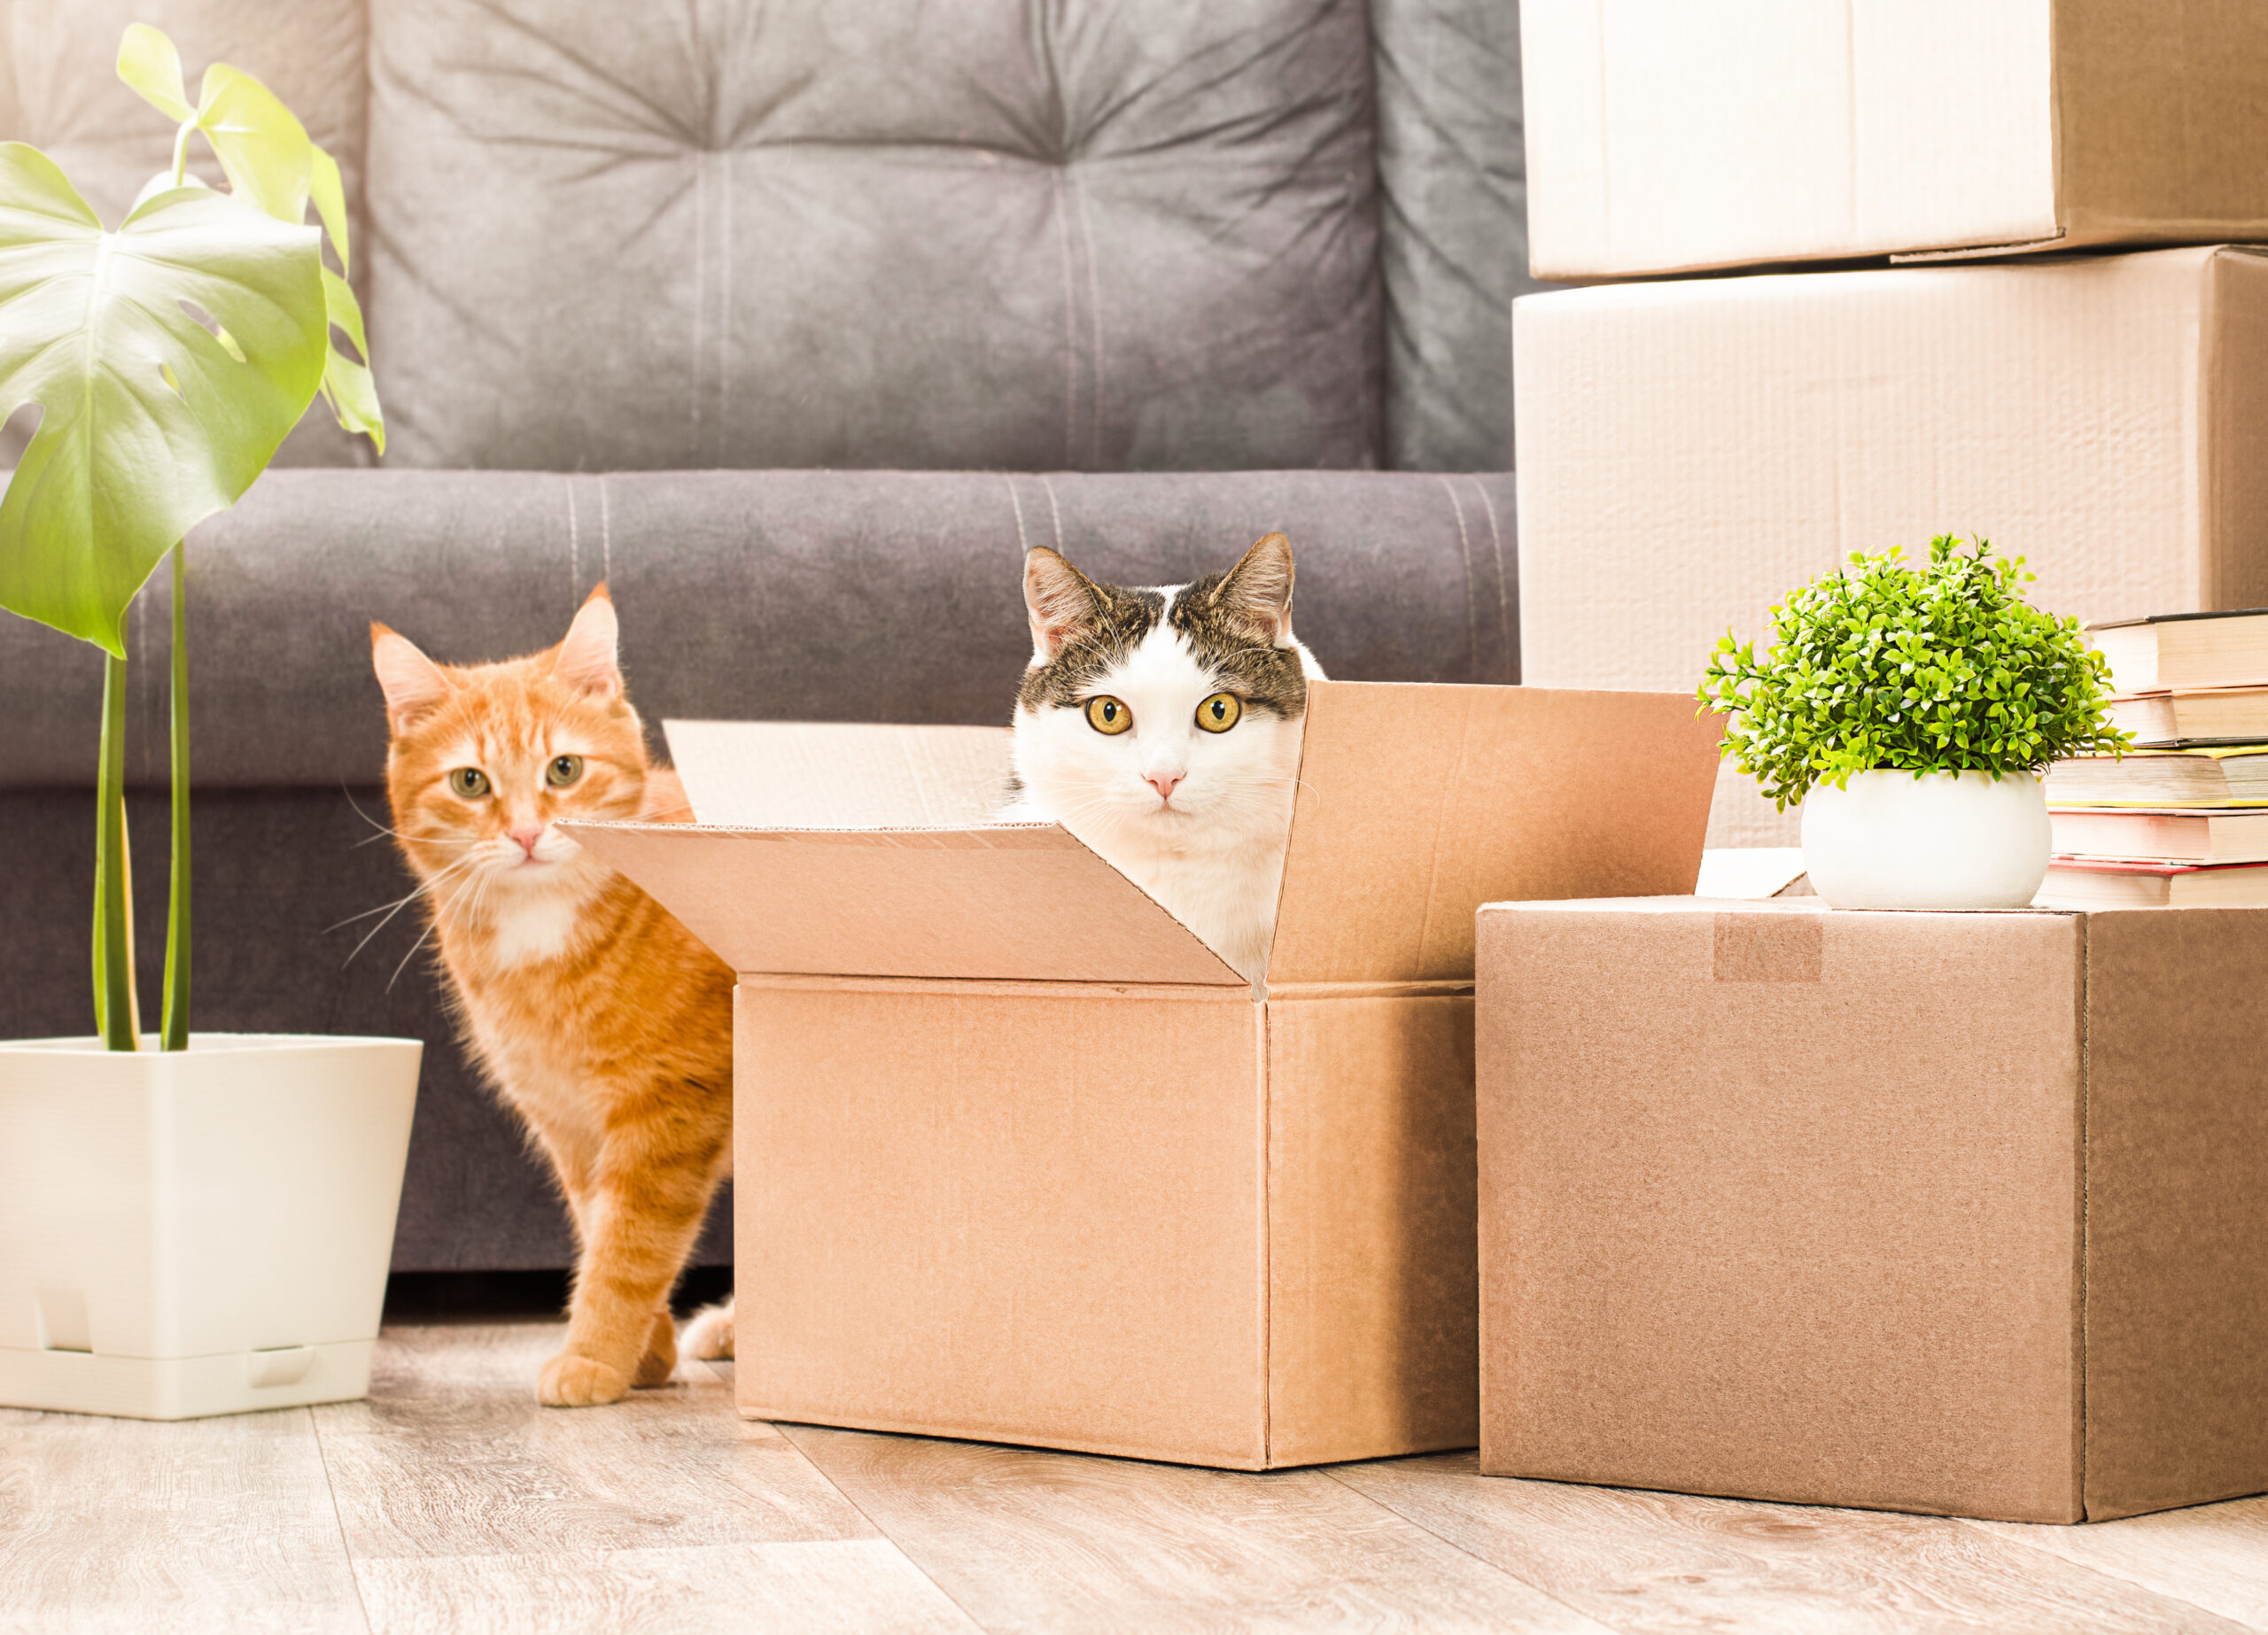 Cats in a box in an apartment